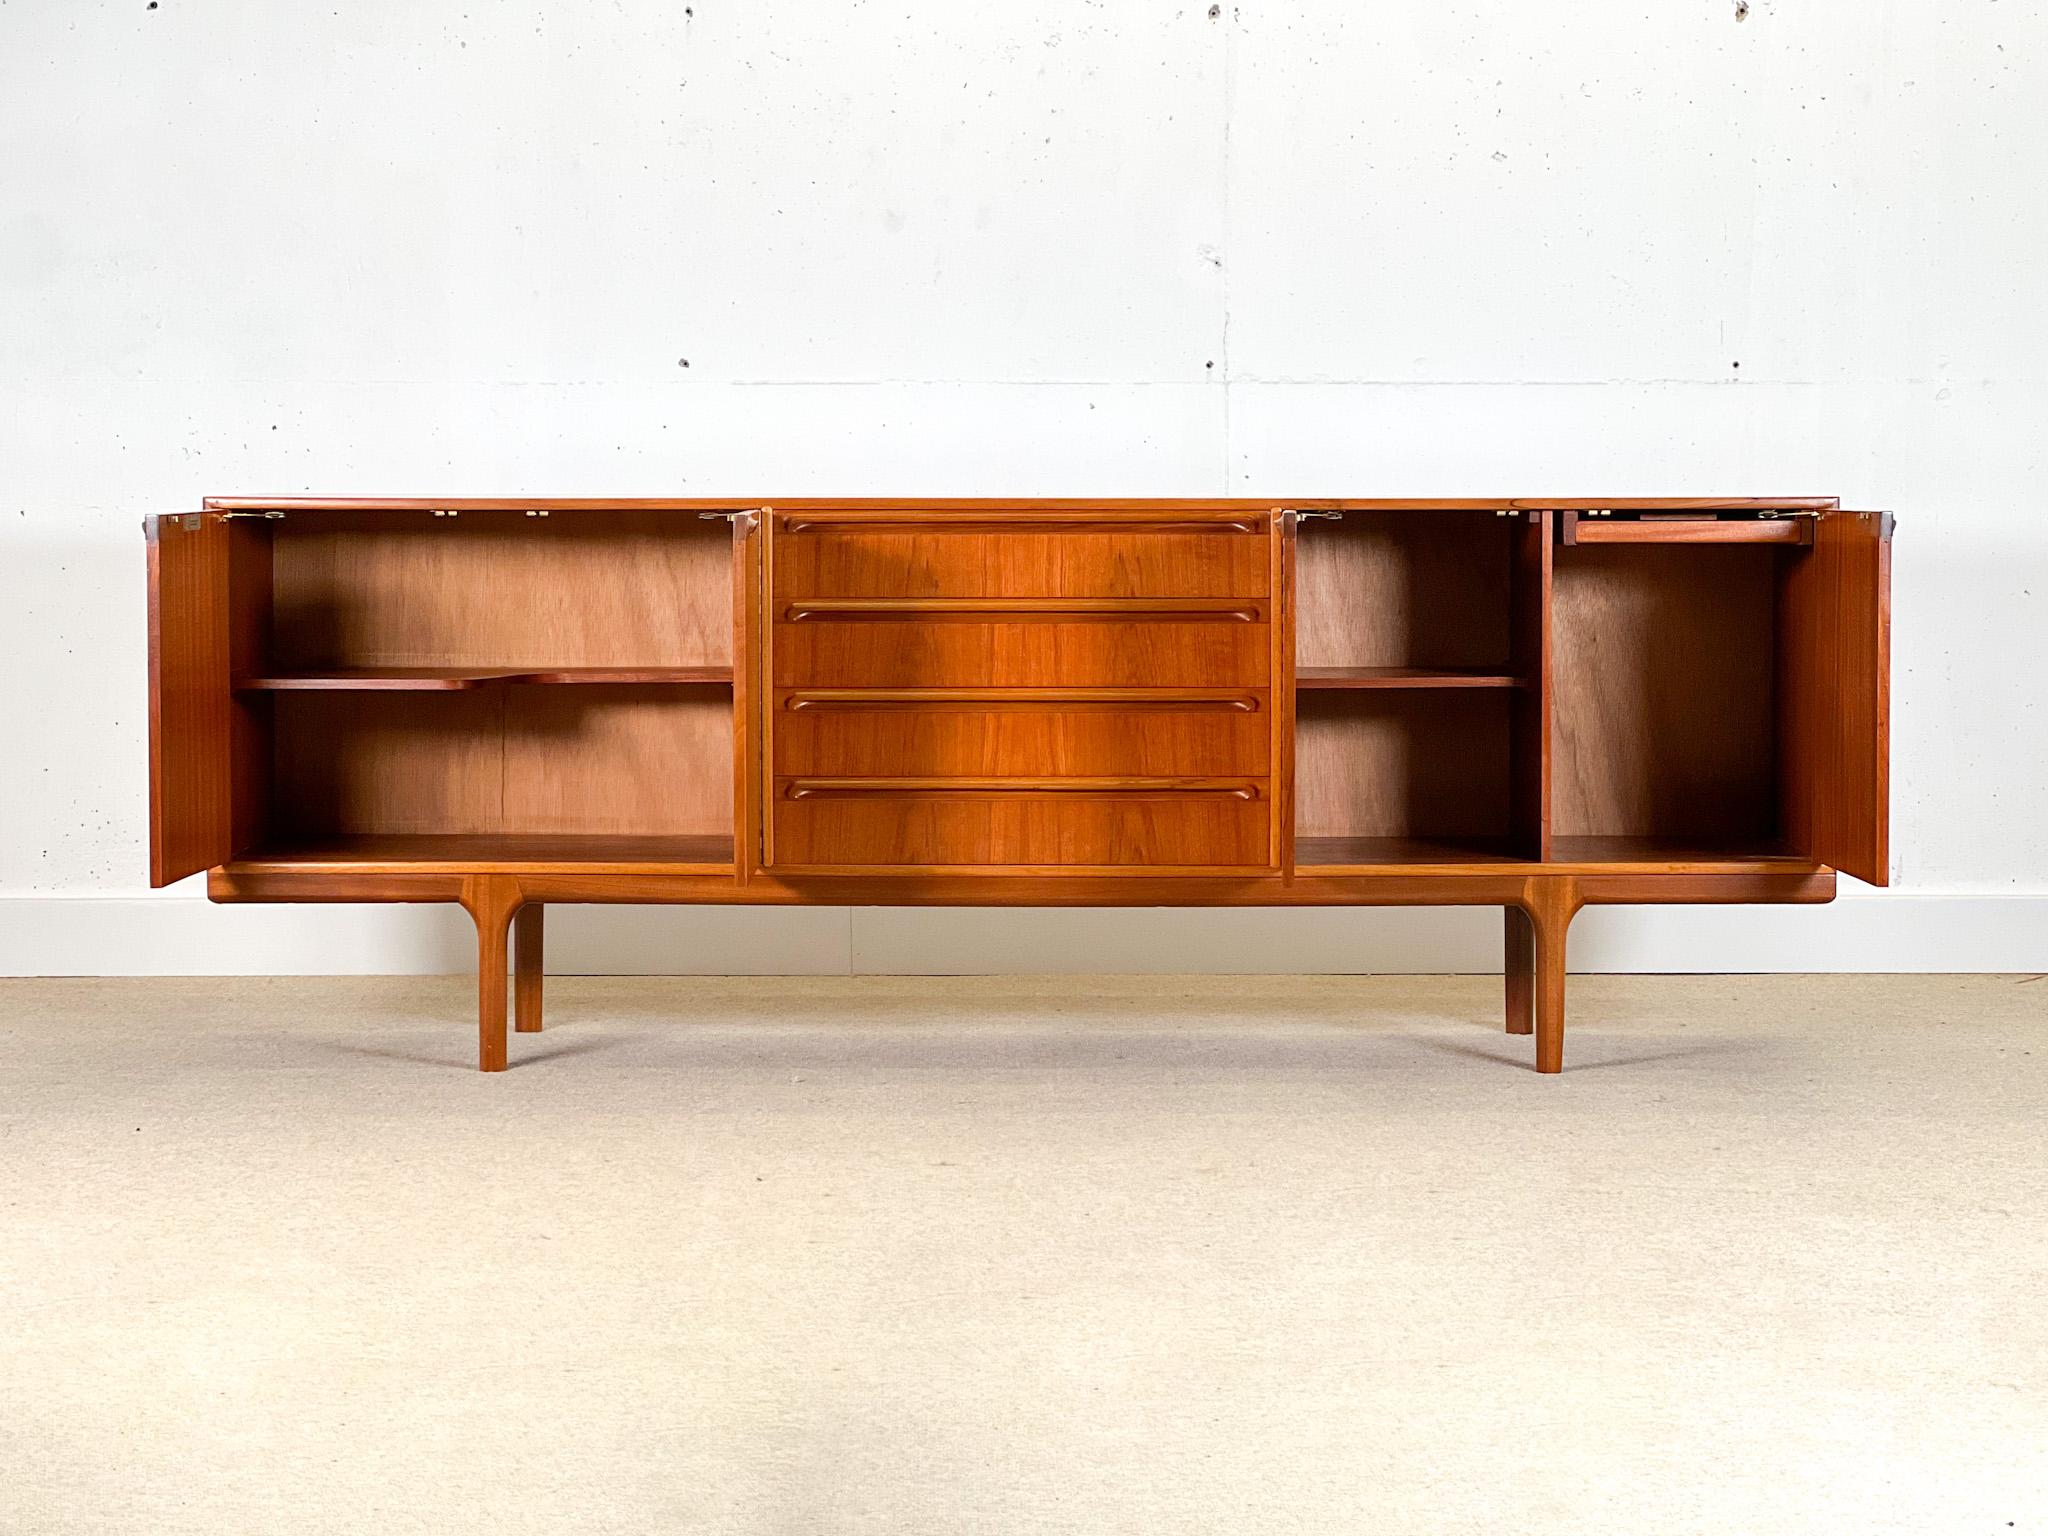 Designed by Tom Robertson for A.H McIntosh and Co., it was made in the 1960s in Scotland.

This Mid-Century piece stands out for its balanced design, designed to create symmetry.

This sideboard has a large storage capacity, with four central